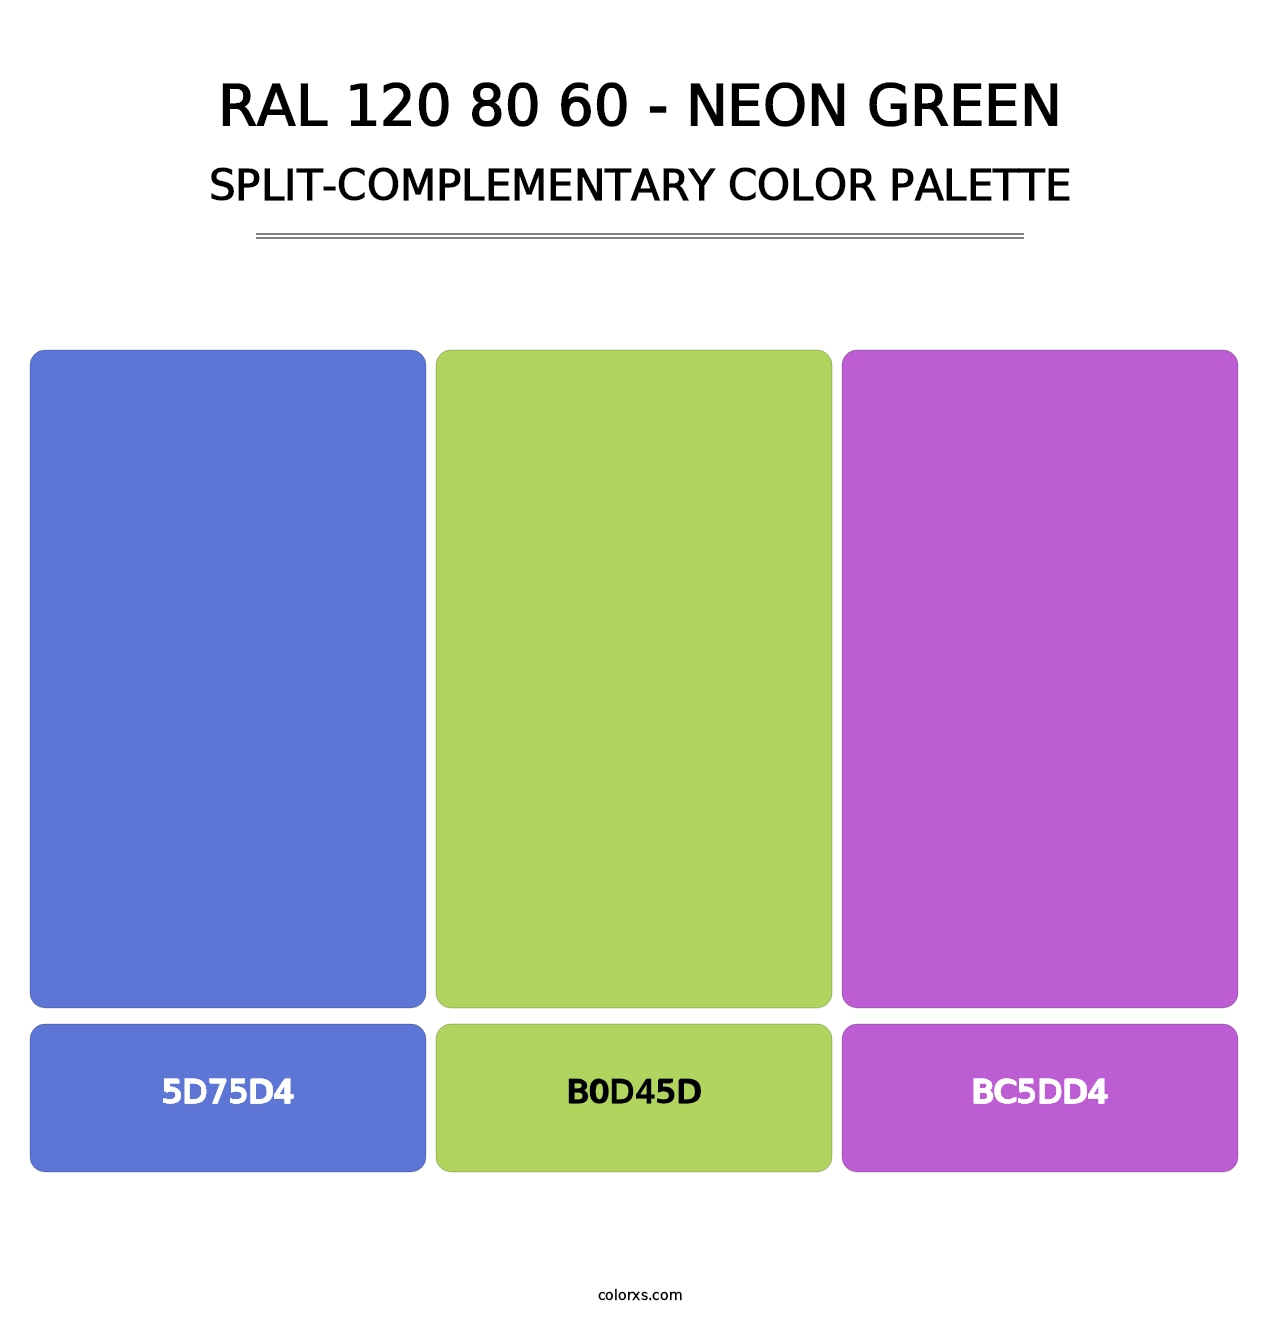 RAL 120 80 60 - Neon Green - Split-Complementary Color Palette